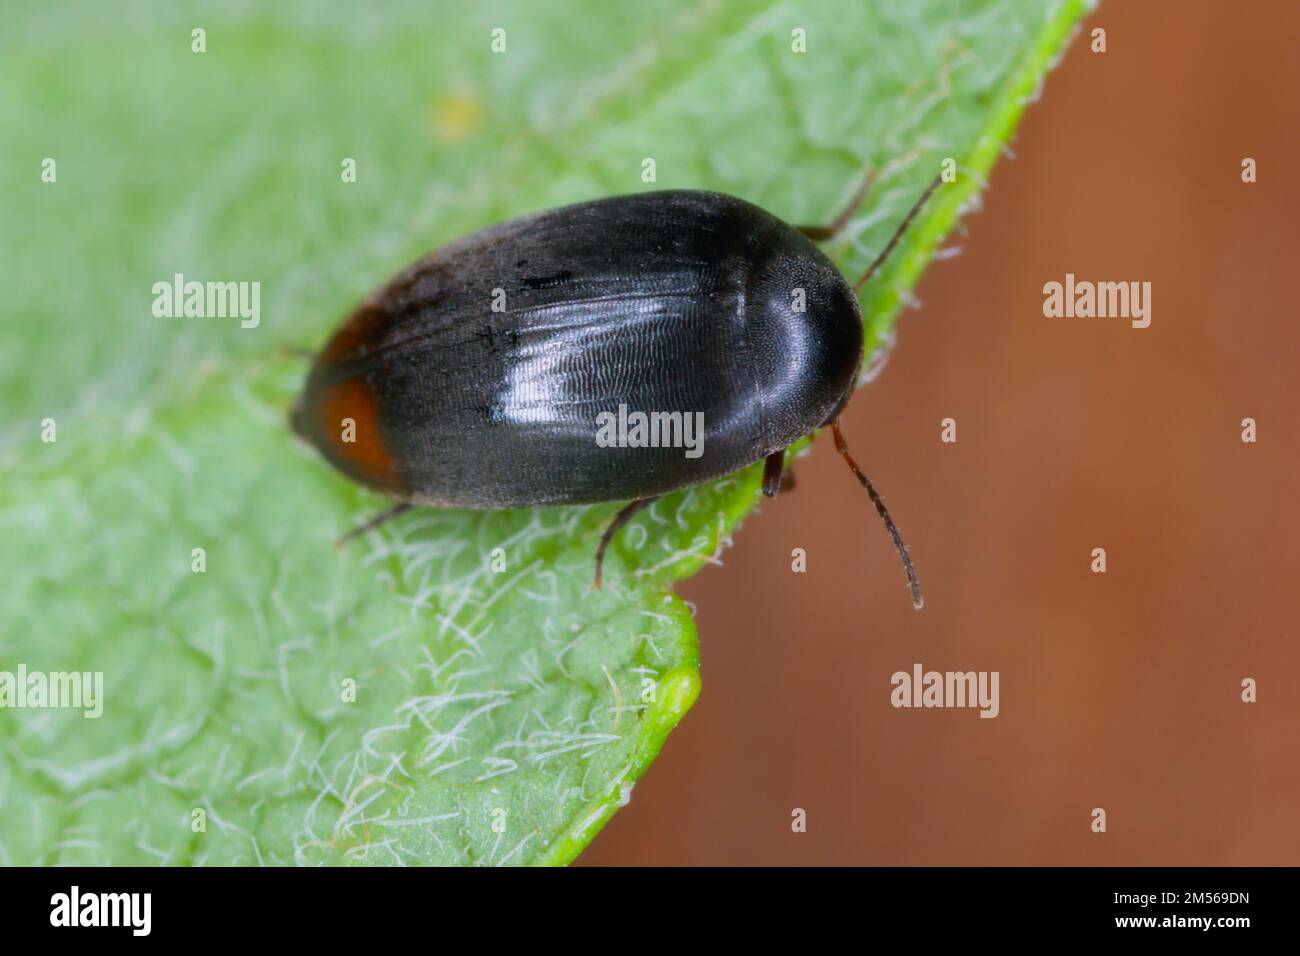 Eucinetus haemorrhoidalis is a species of plate-thigh beetle in the family Eucinetidae, it is holarctic in distribution, including the North American Stock Photo